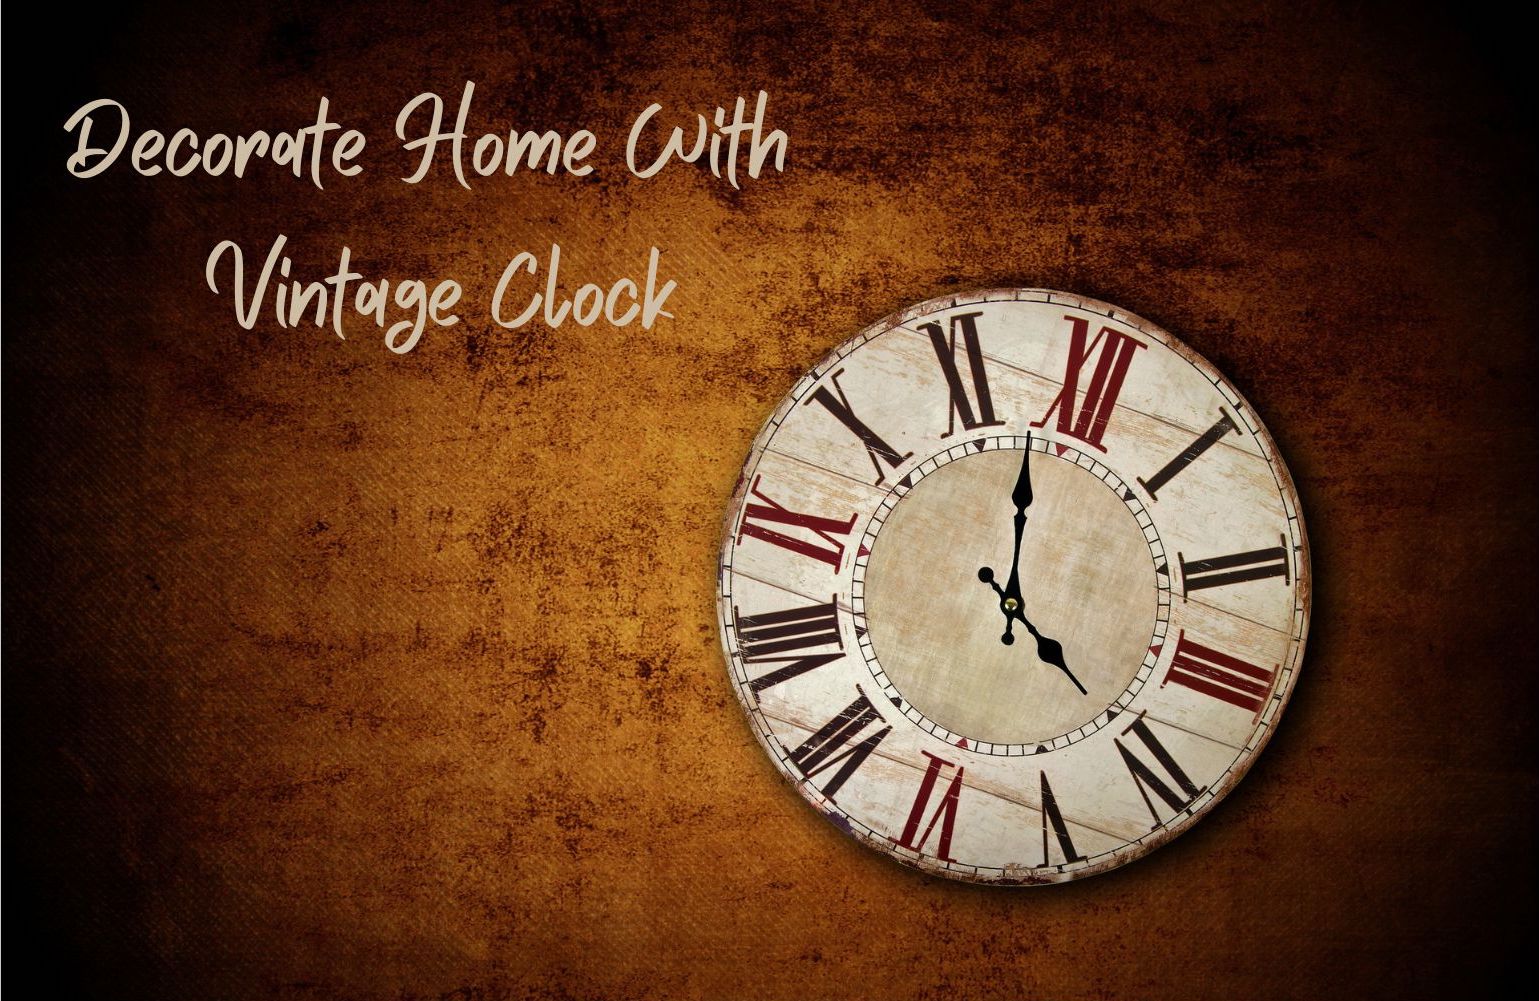 5 Tips To Decorate Home With Vintage Clocks - The Handmade Store